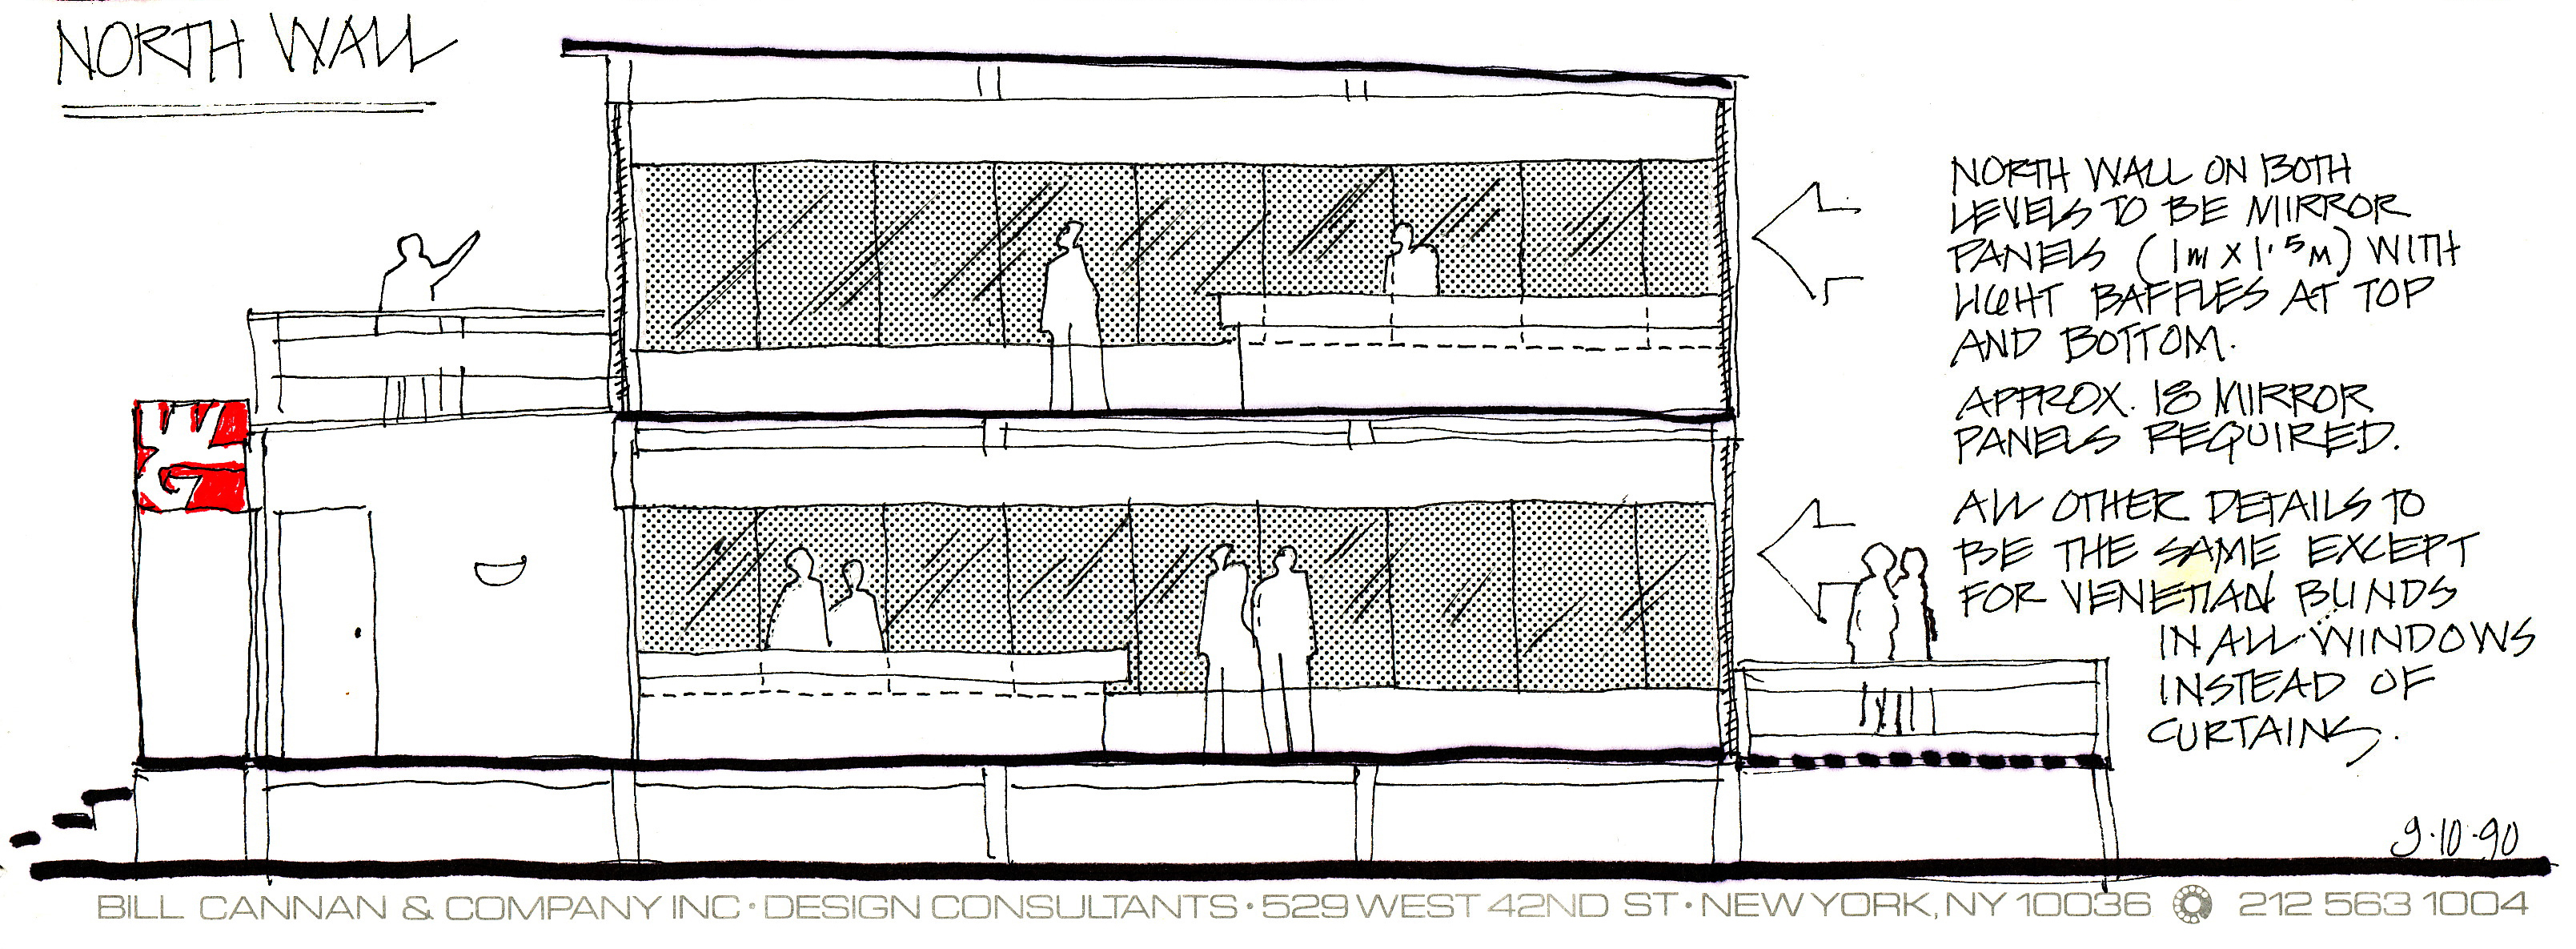 Drawing of the North wall of a chalet.